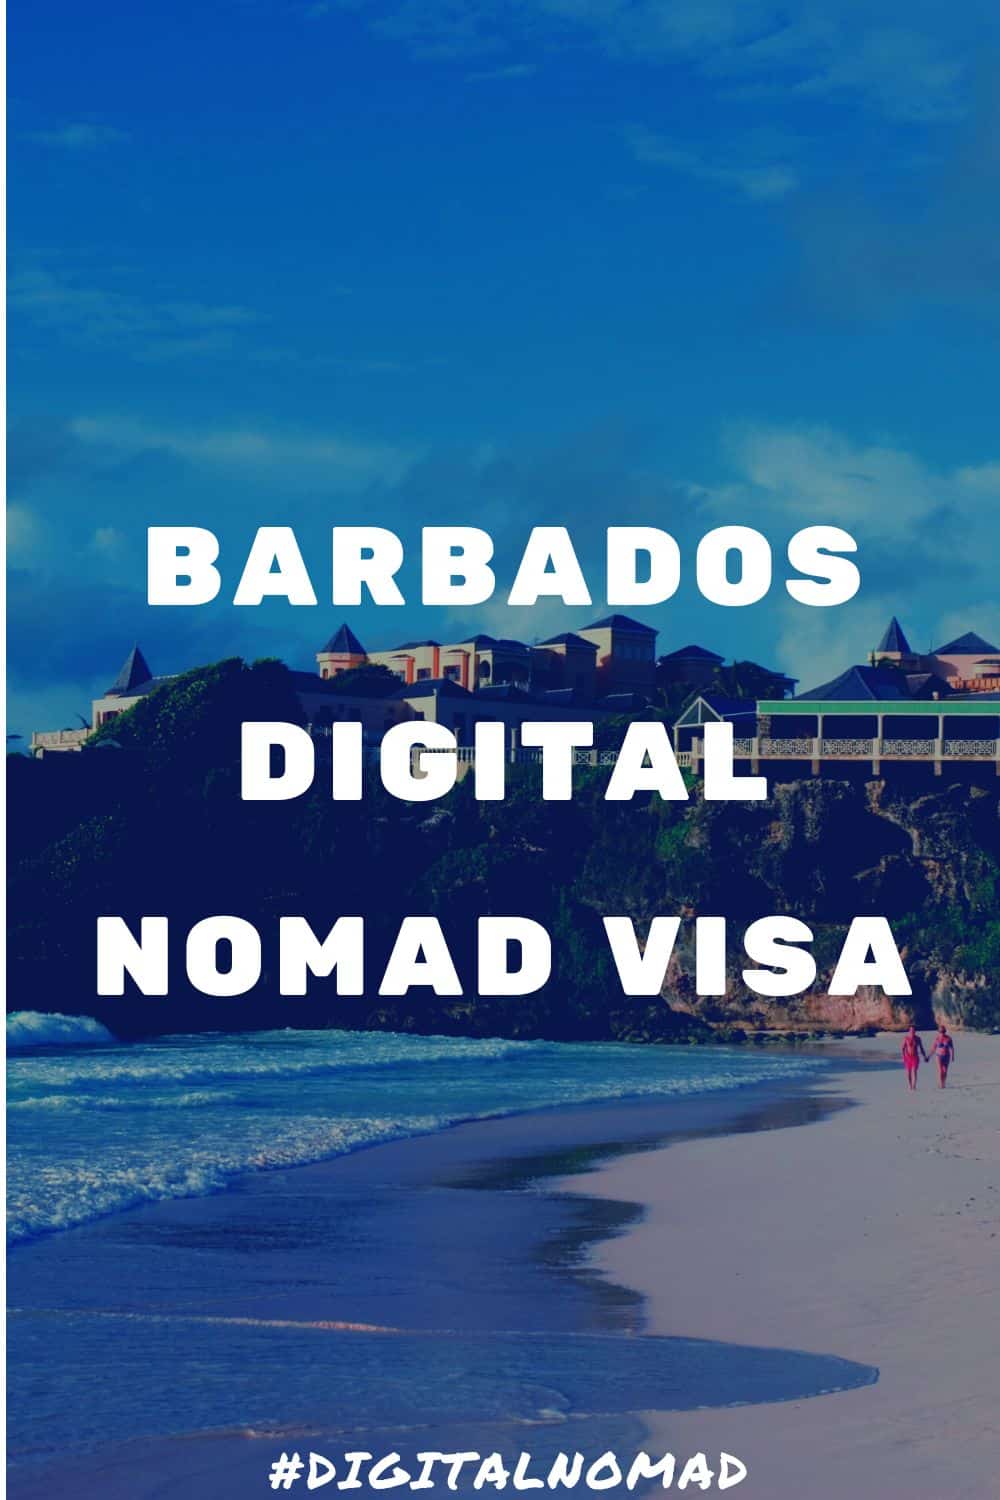 All You Need to Know about Barbados Digital Nomad Visa